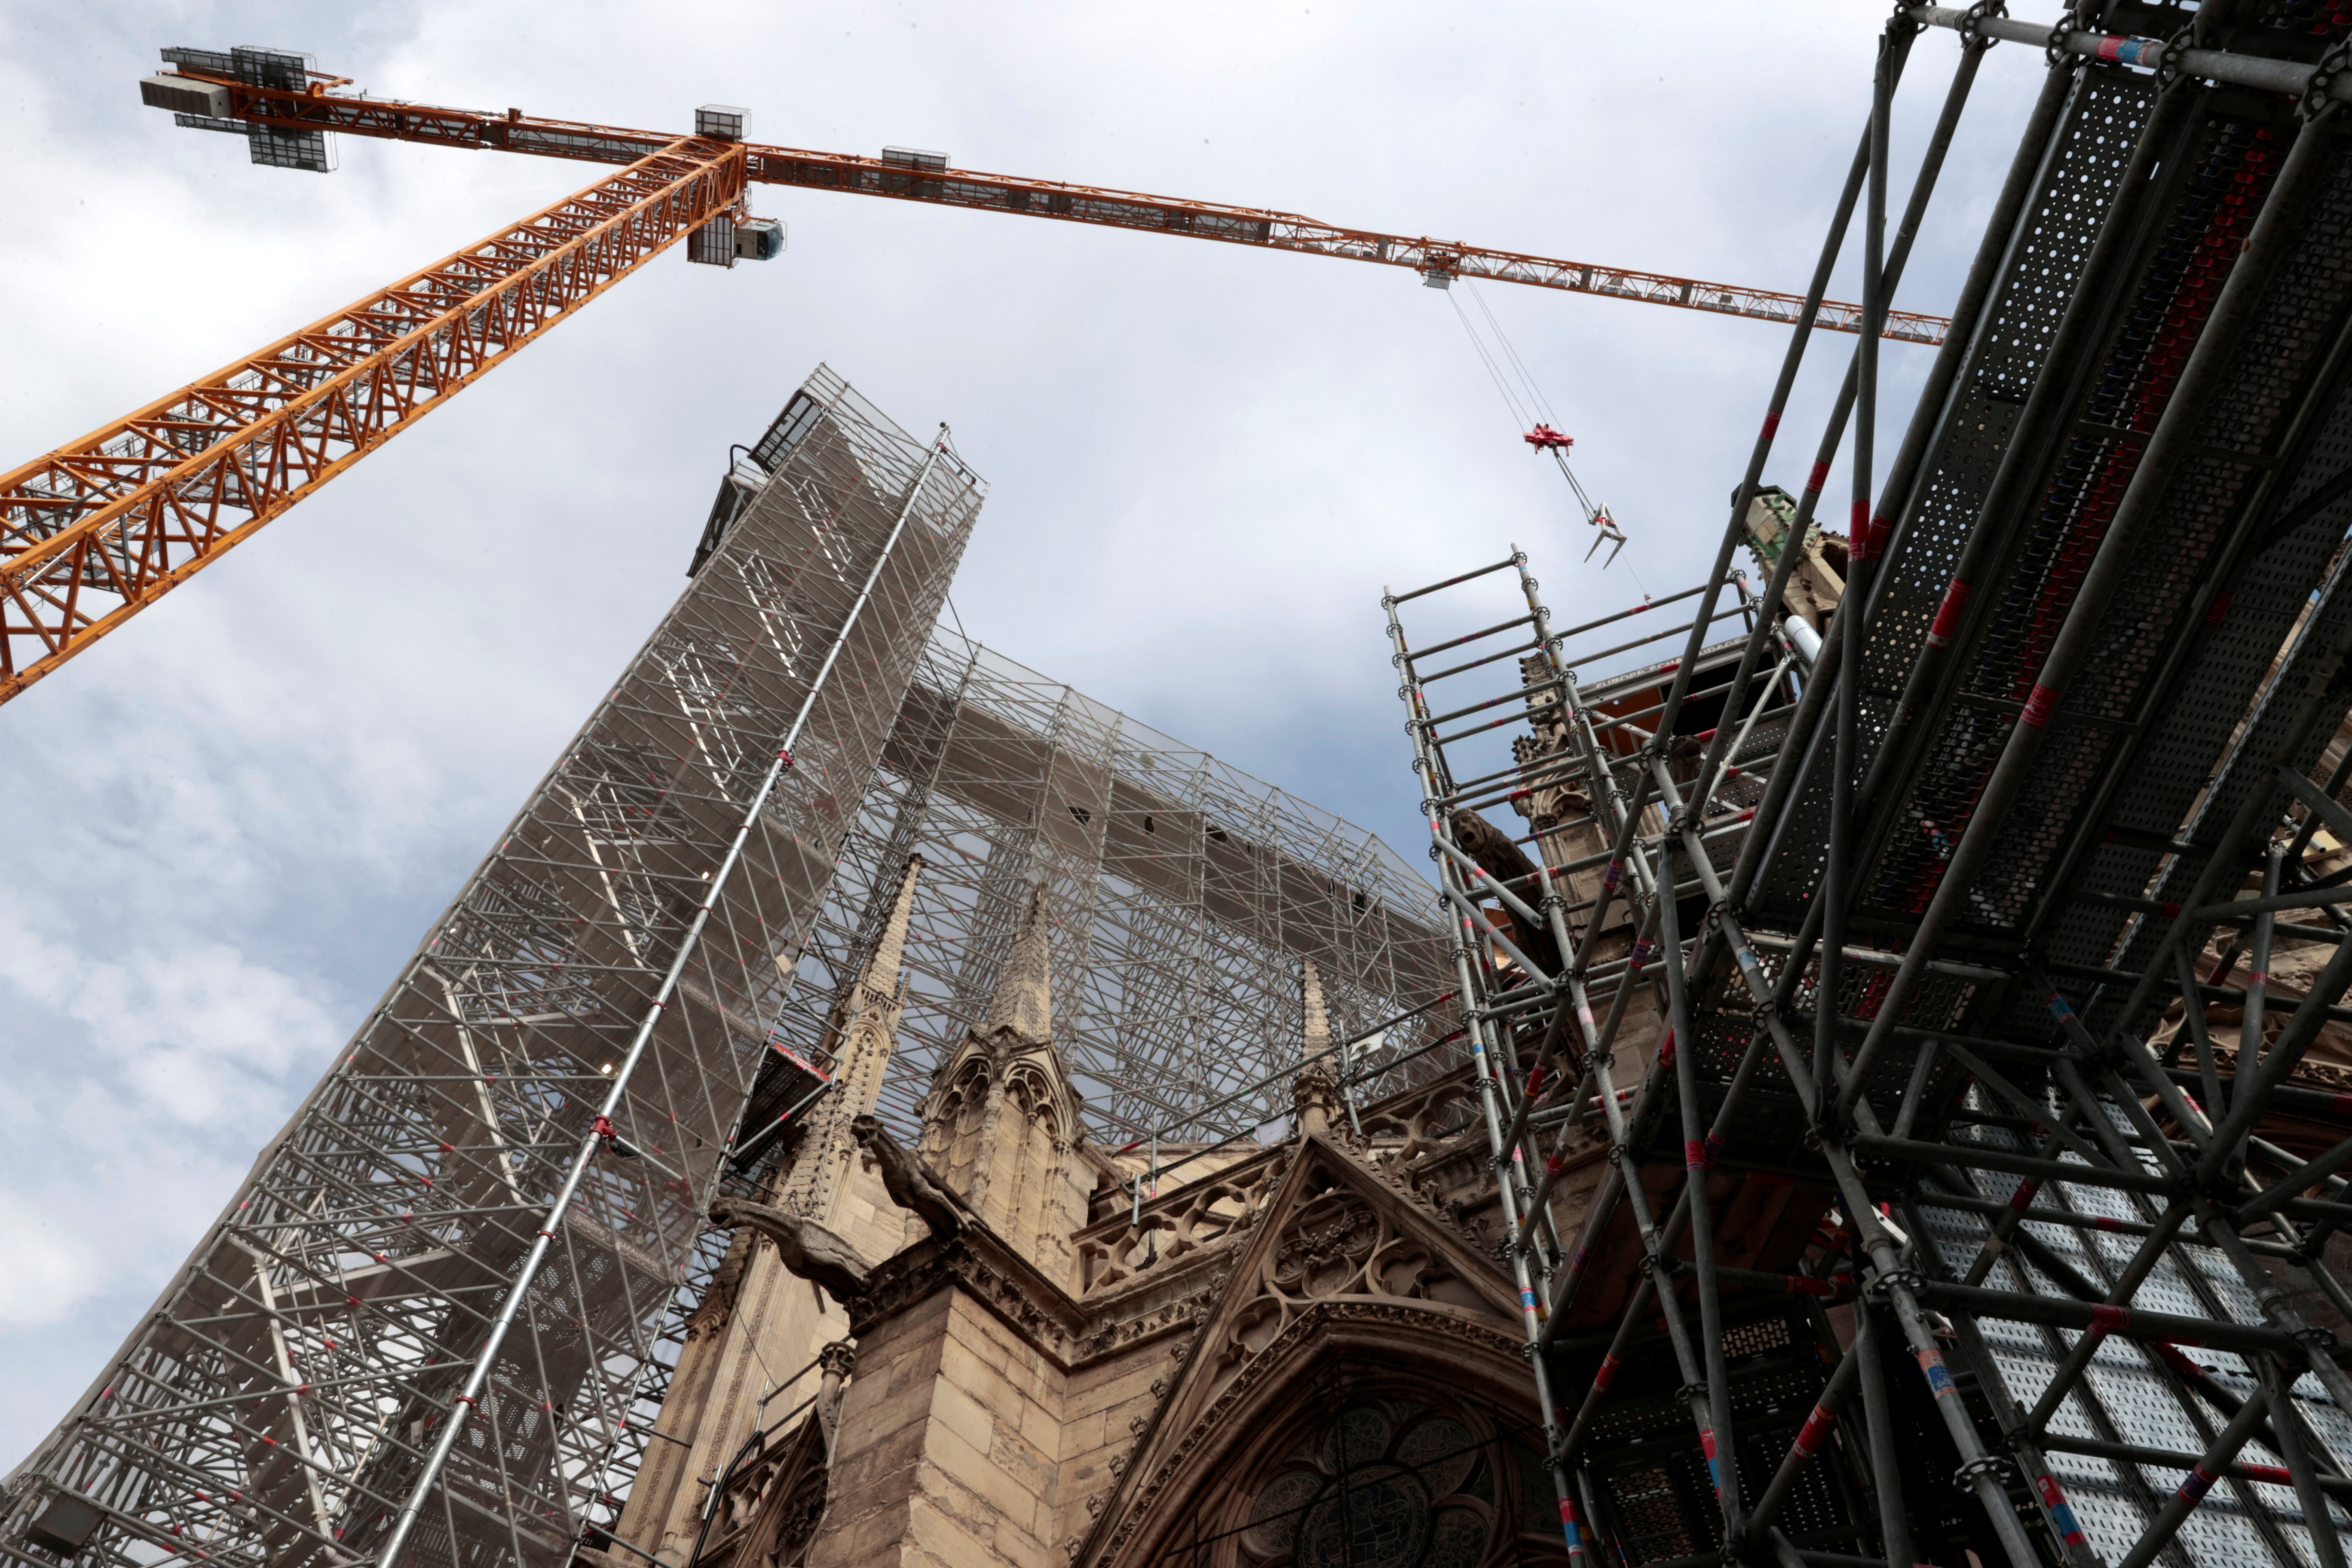 French culture minister visits Notre Dame Cathedral building site